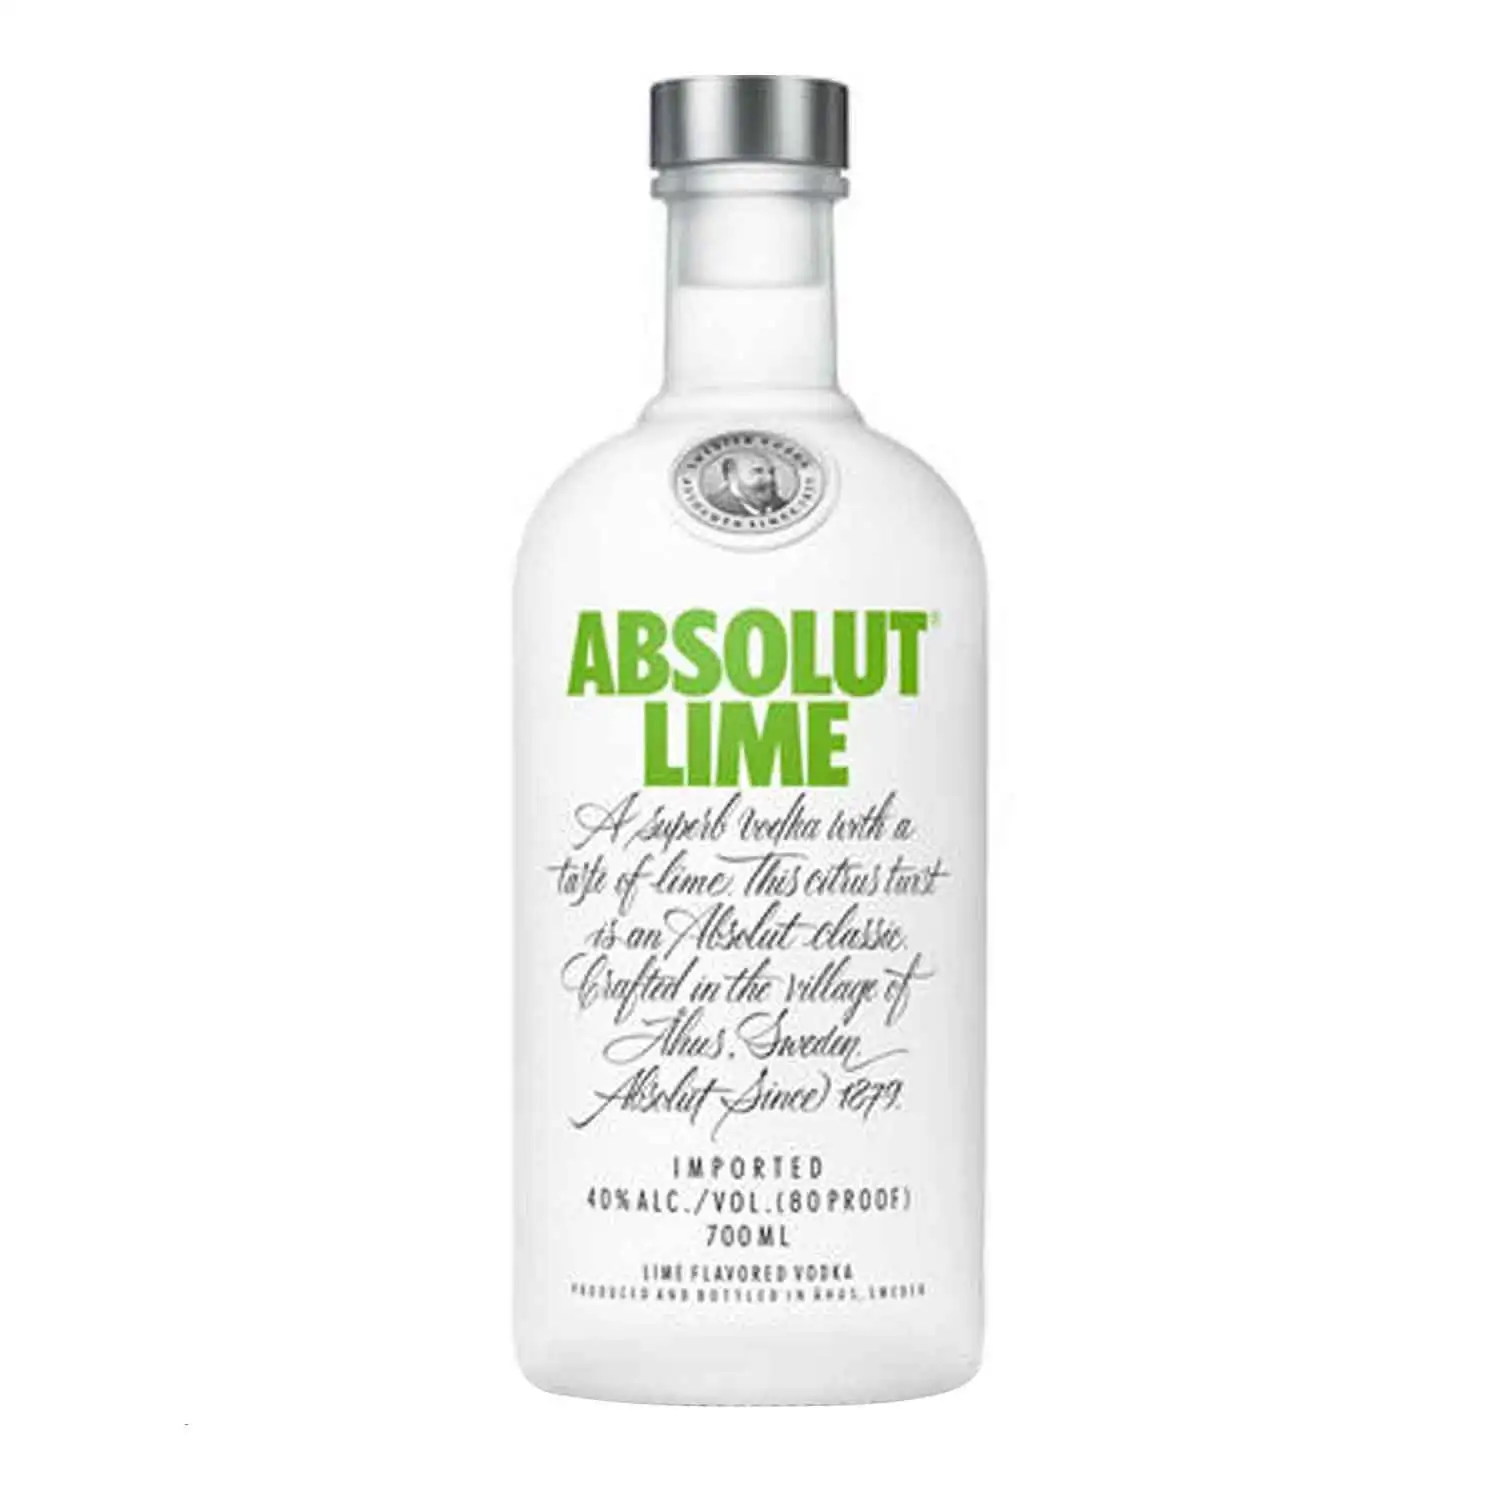 Absolut lime 70cl Alc 40% - Buy at Real Tobacco